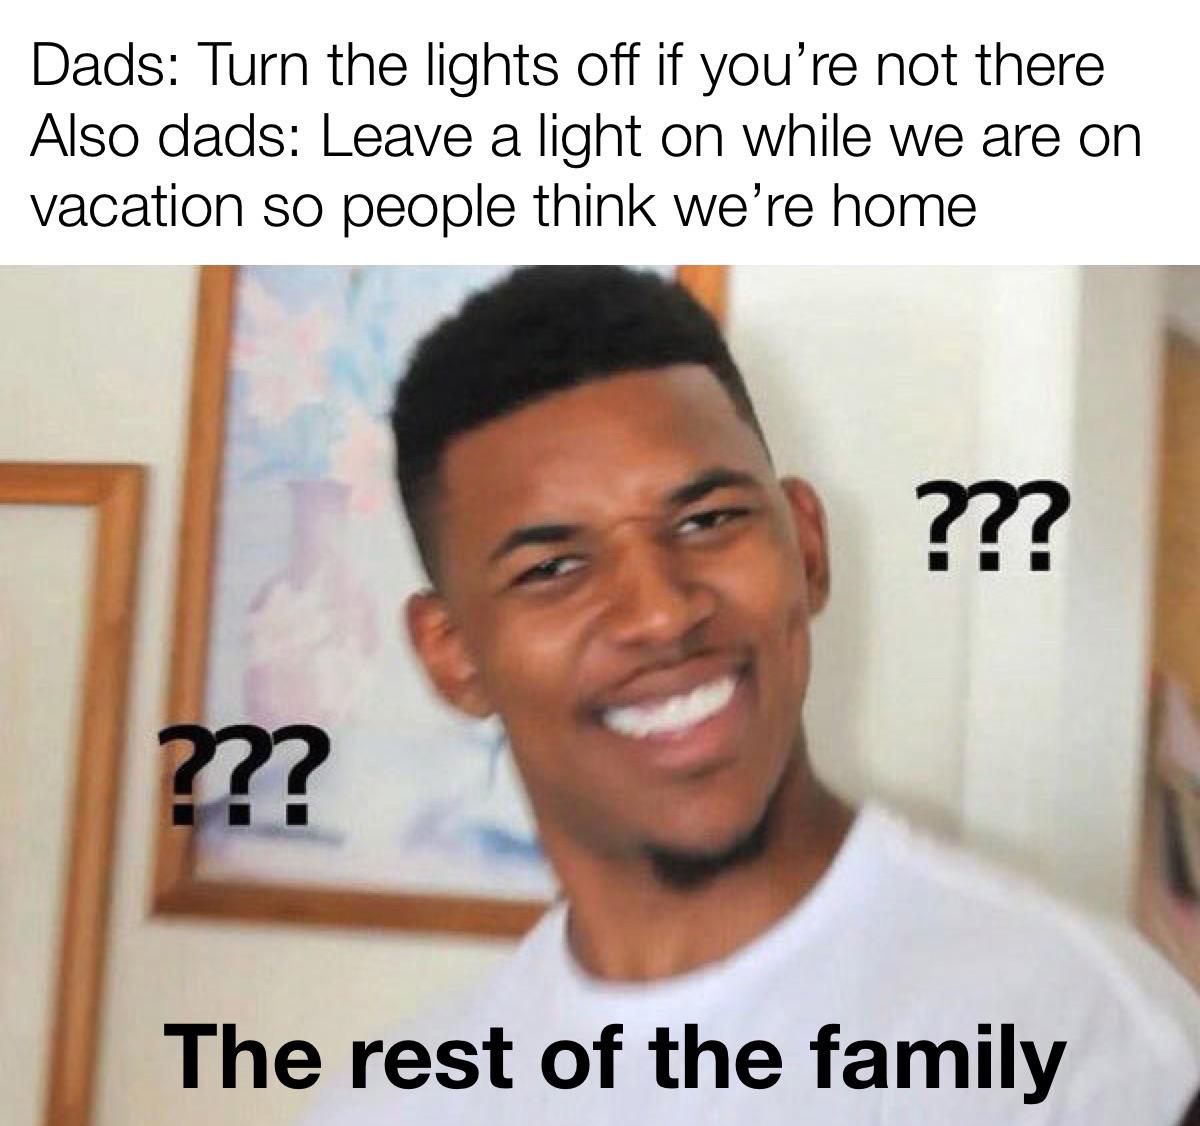 monday morning randomness - hairstyle - Dads Turn the lights off if you're not there Also dads Leave a light on while we are on vacation so people think we're home ??? ??? The rest of the family